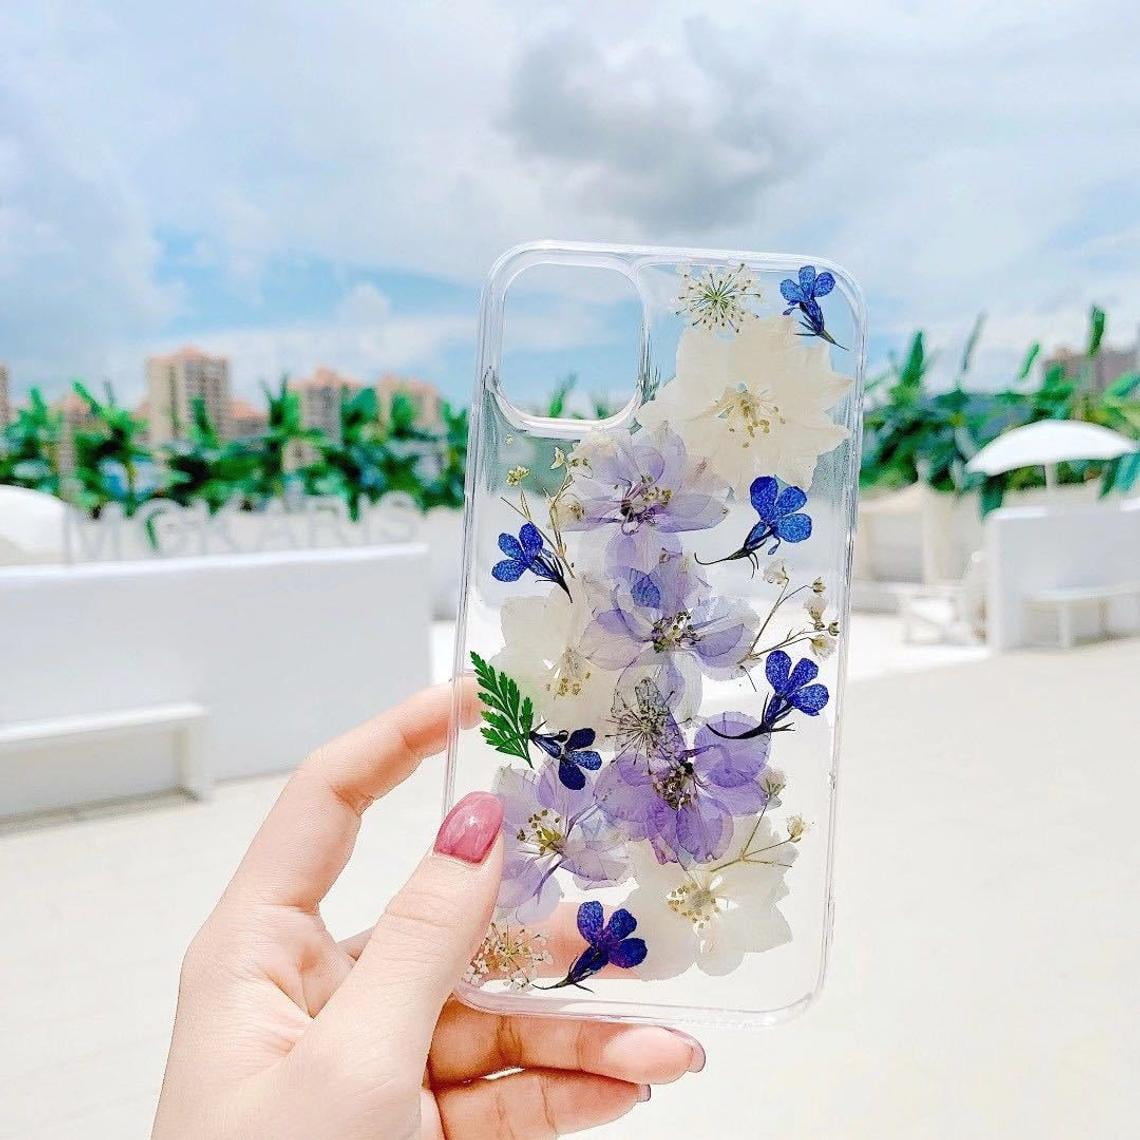 Iphone 12 Mini Case Gmyle Dried Flowers Pressed Gel Clear Silicone Hard Back Cover Full Body Slim Girls Cute For Apple Iphone 12 Mini 5 4 Inch Purple White Flowers